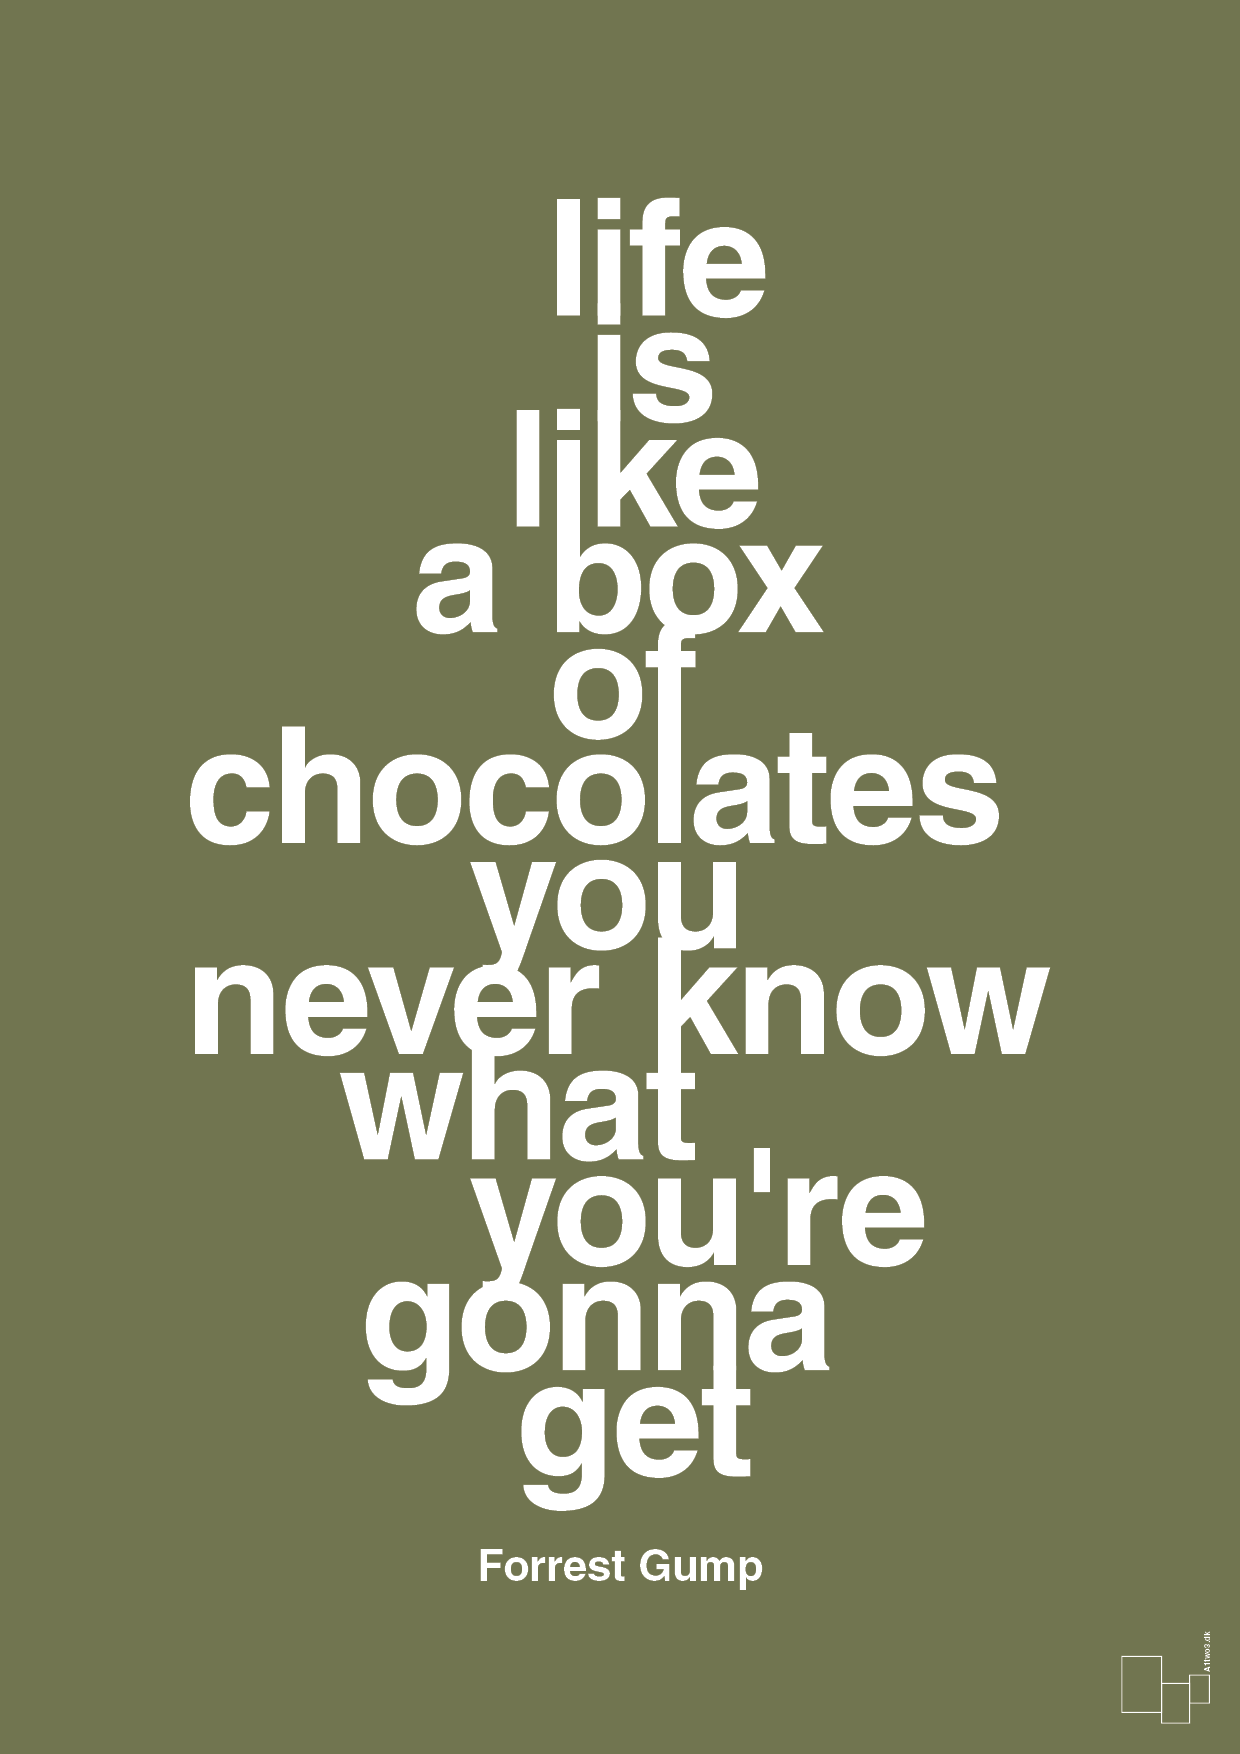 life is like a box of chocolates you never know what you're gonna get - Plakat med Citater i Secret Meadow